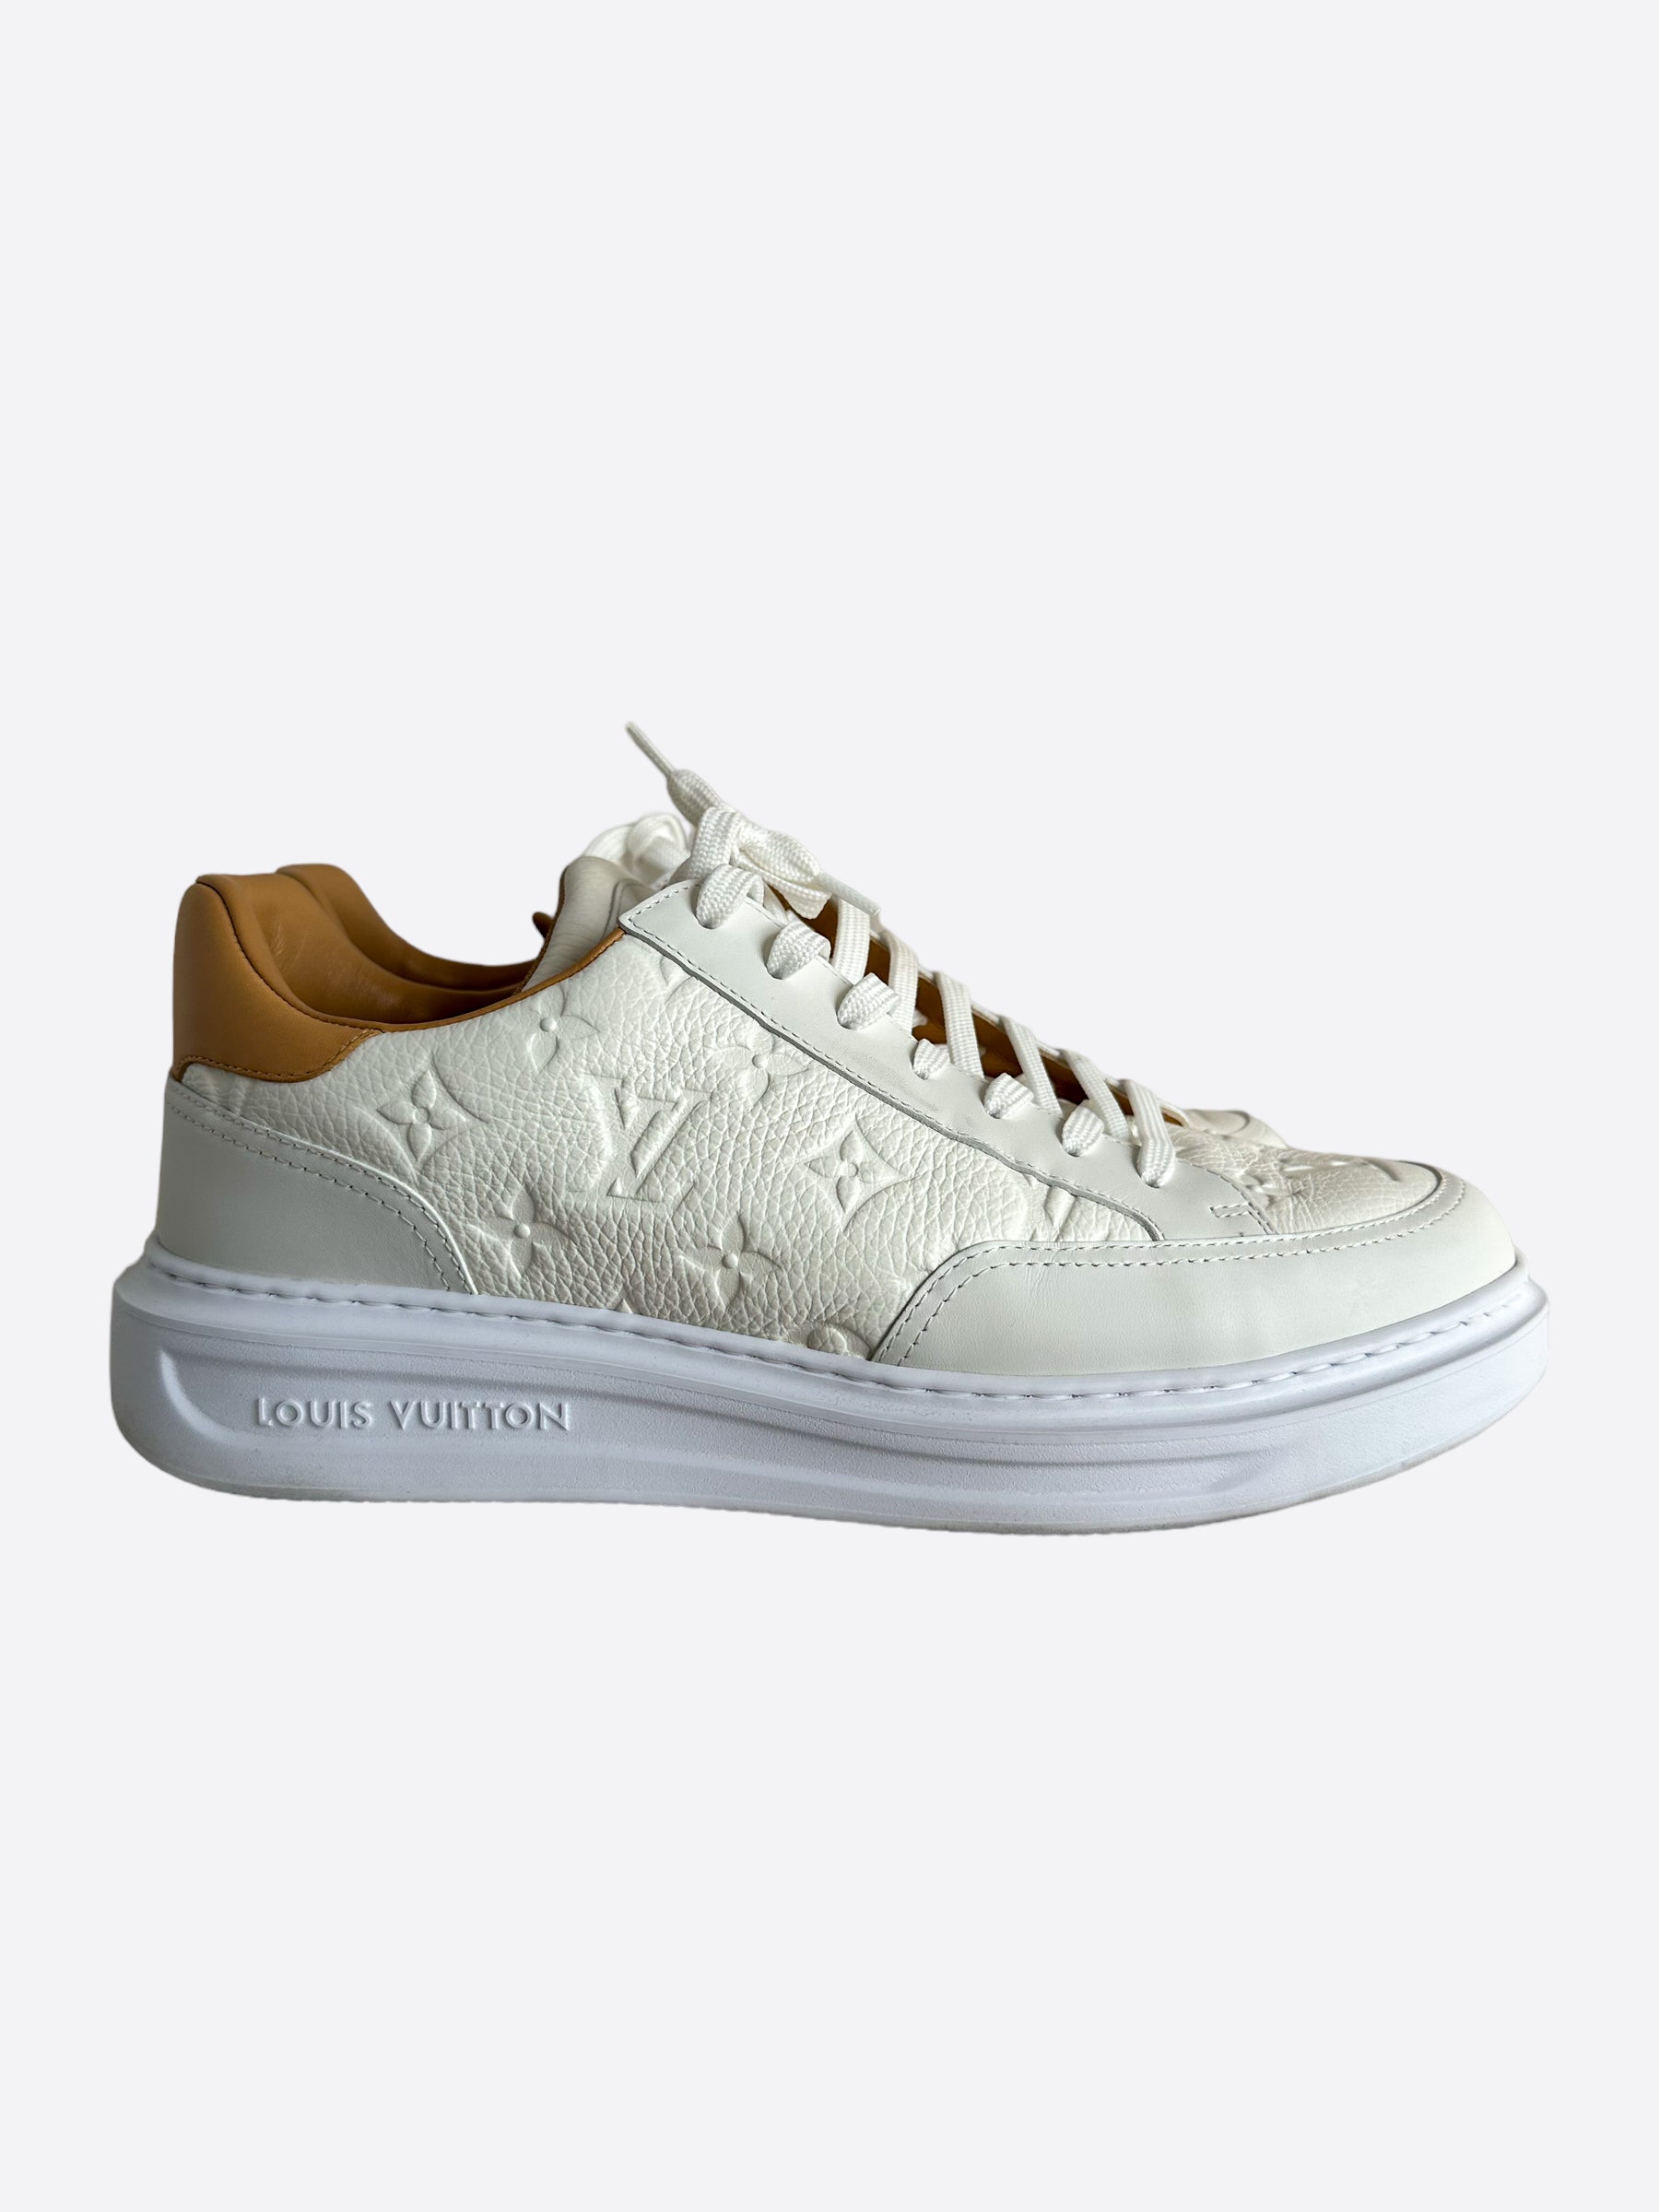 Louis Vuitton Beverly Hill Sneaker Sneakers w/ Tags - White